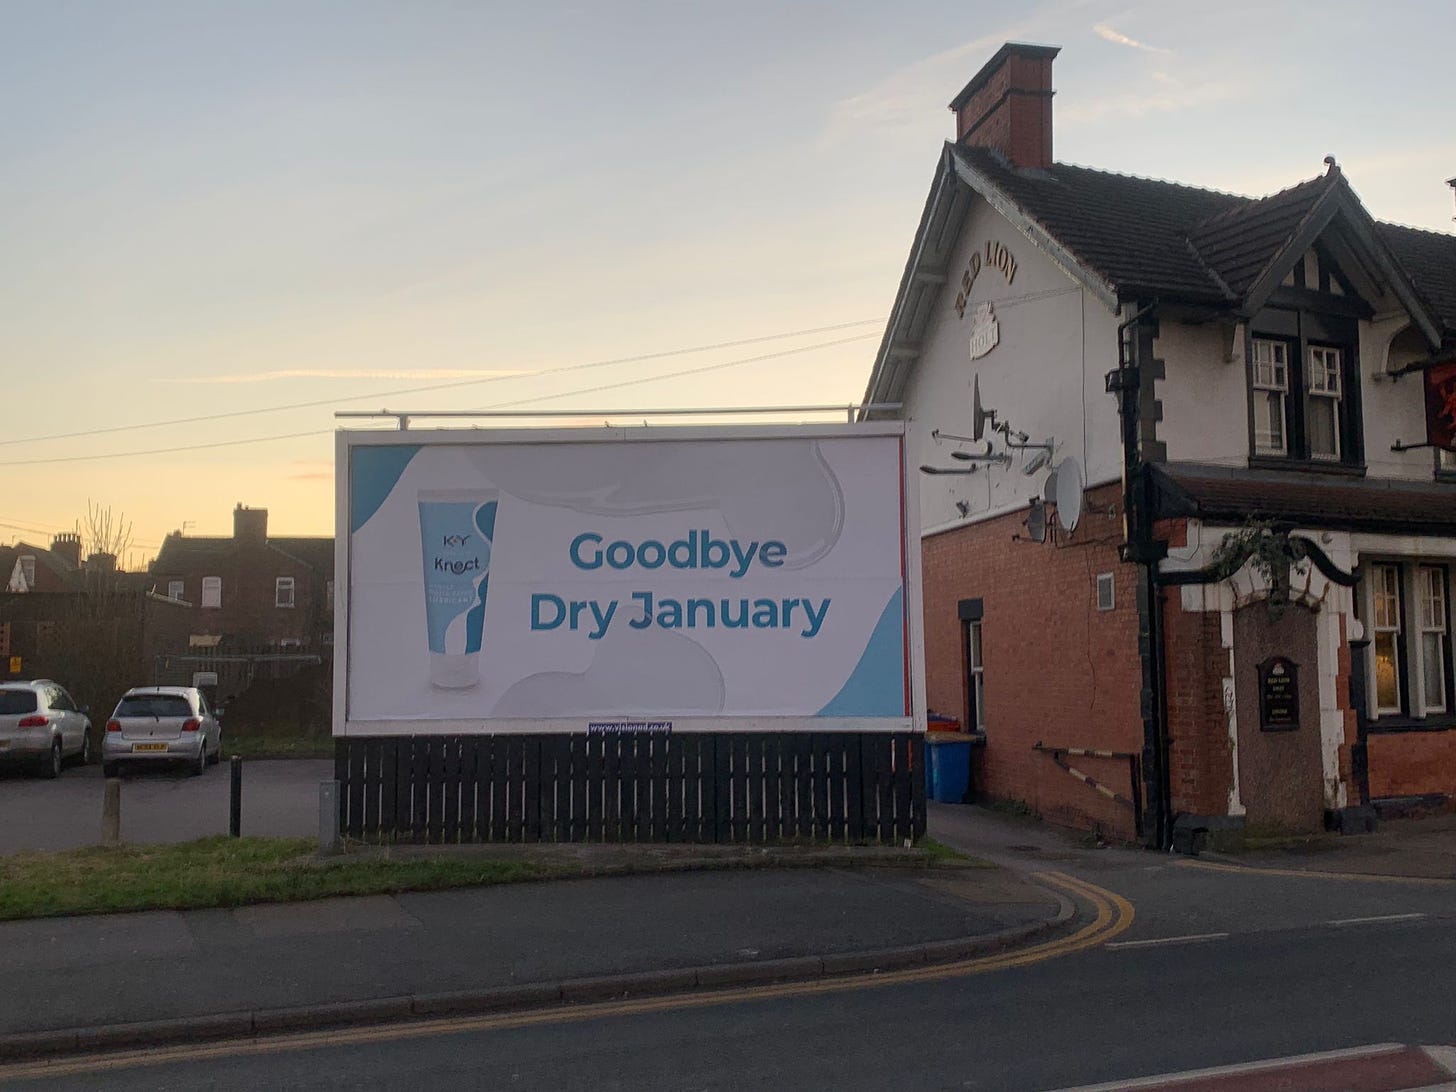 An advert for KY Kinect with the line "Goodbye Dry January"